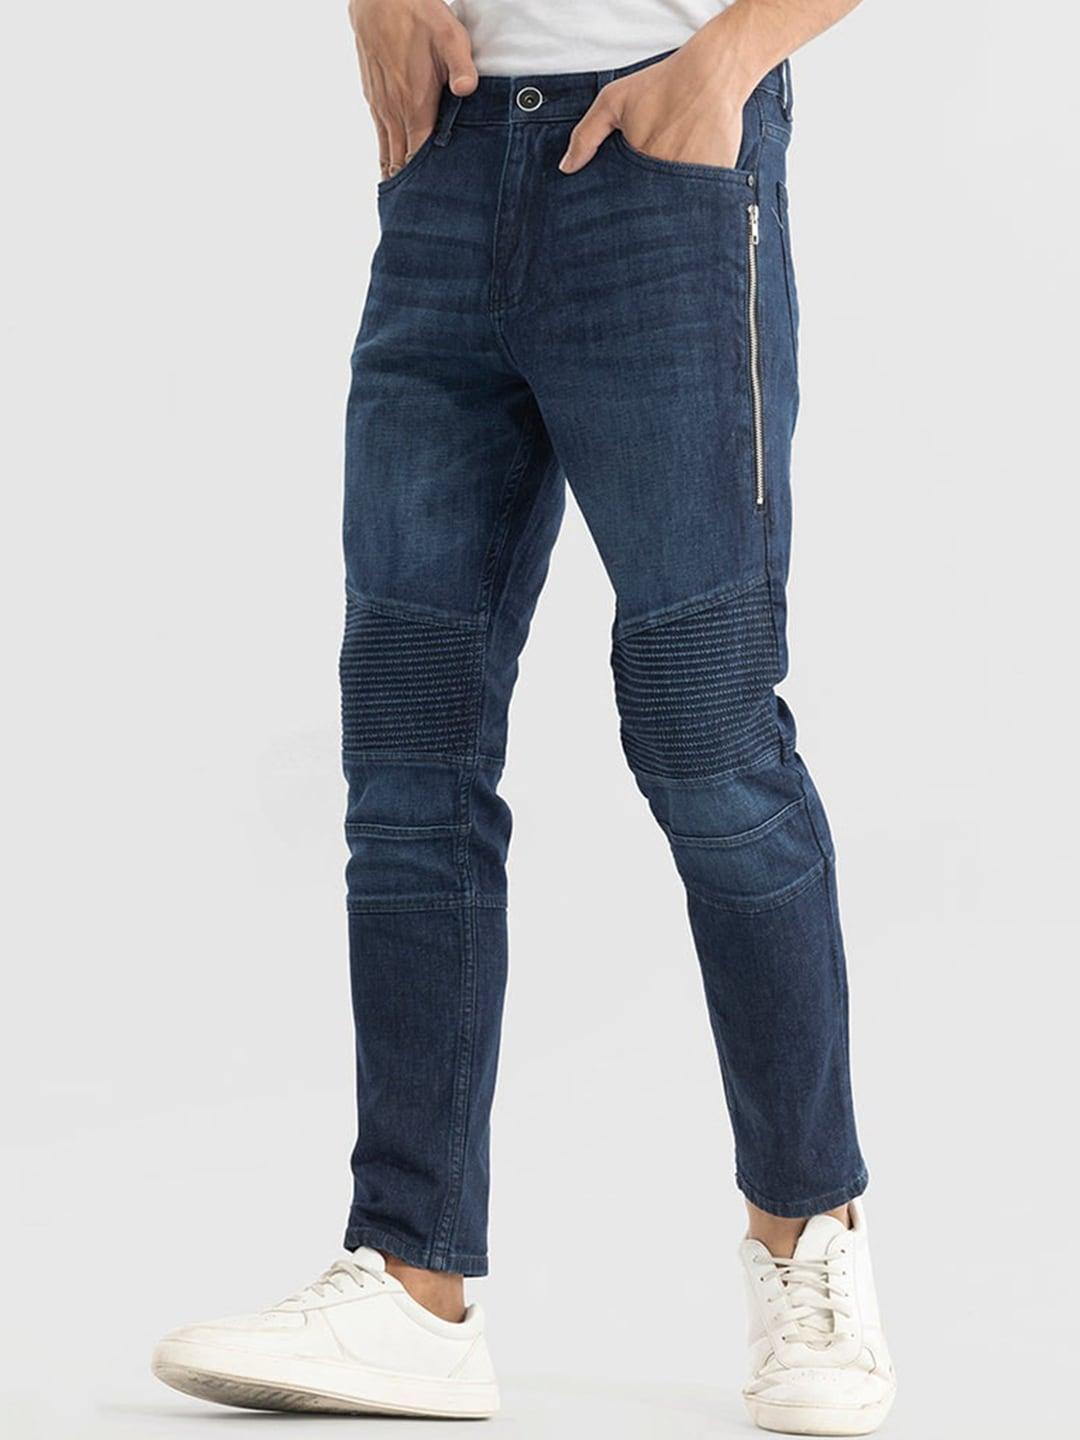 snitch-men-skinny-fit-light-fade-clean-look-stretchable-jeans